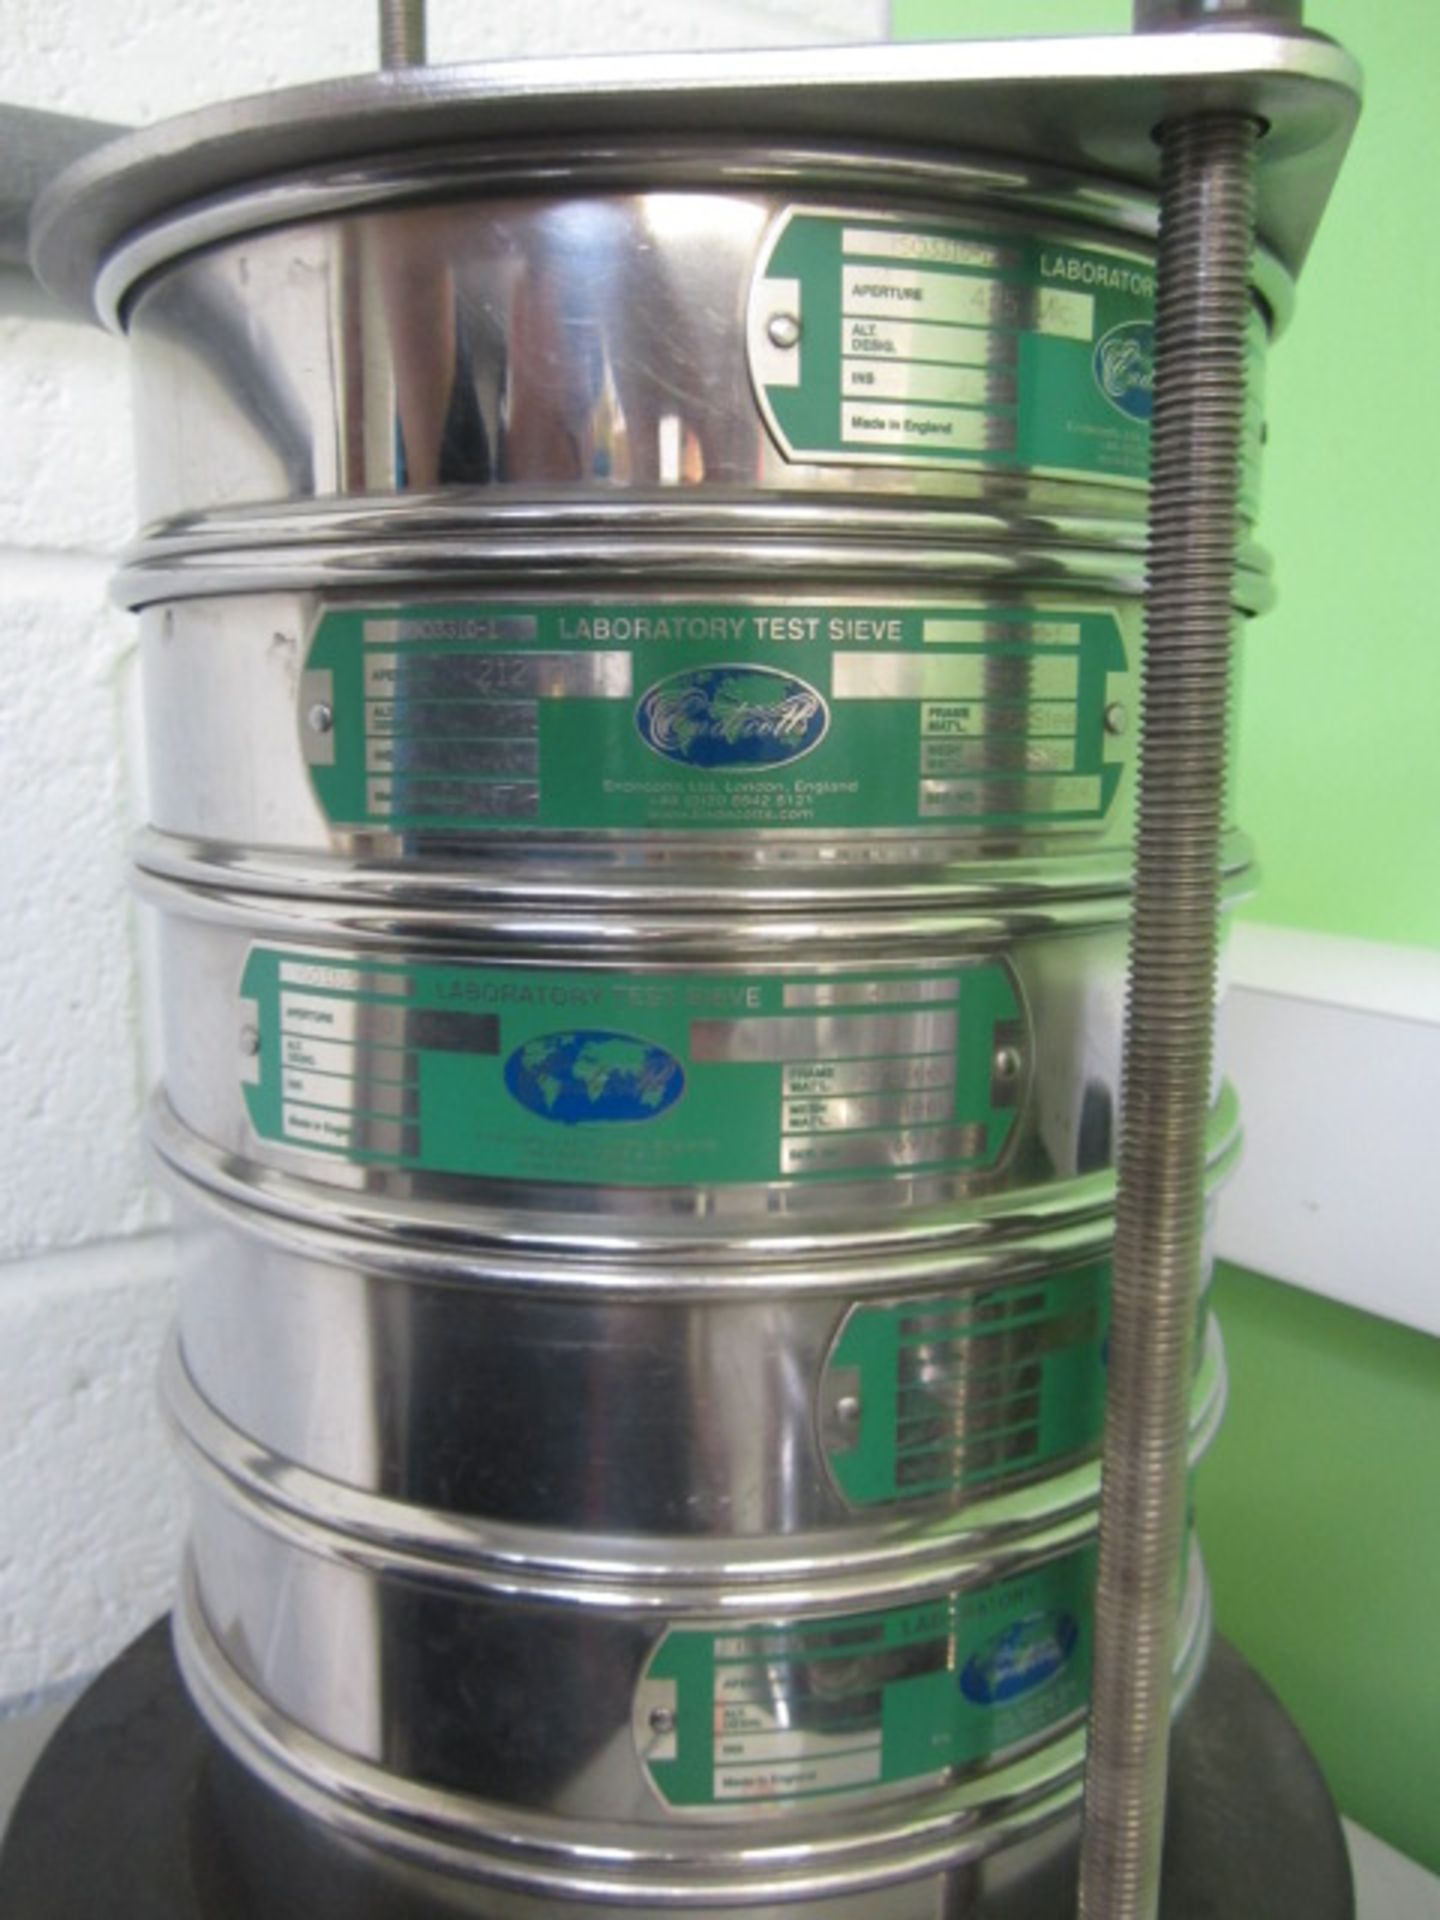 Retsch AS200 sieve shaker, serial number 12102502041 with 5 x stainless steel graded test sieves, - Image 4 of 4